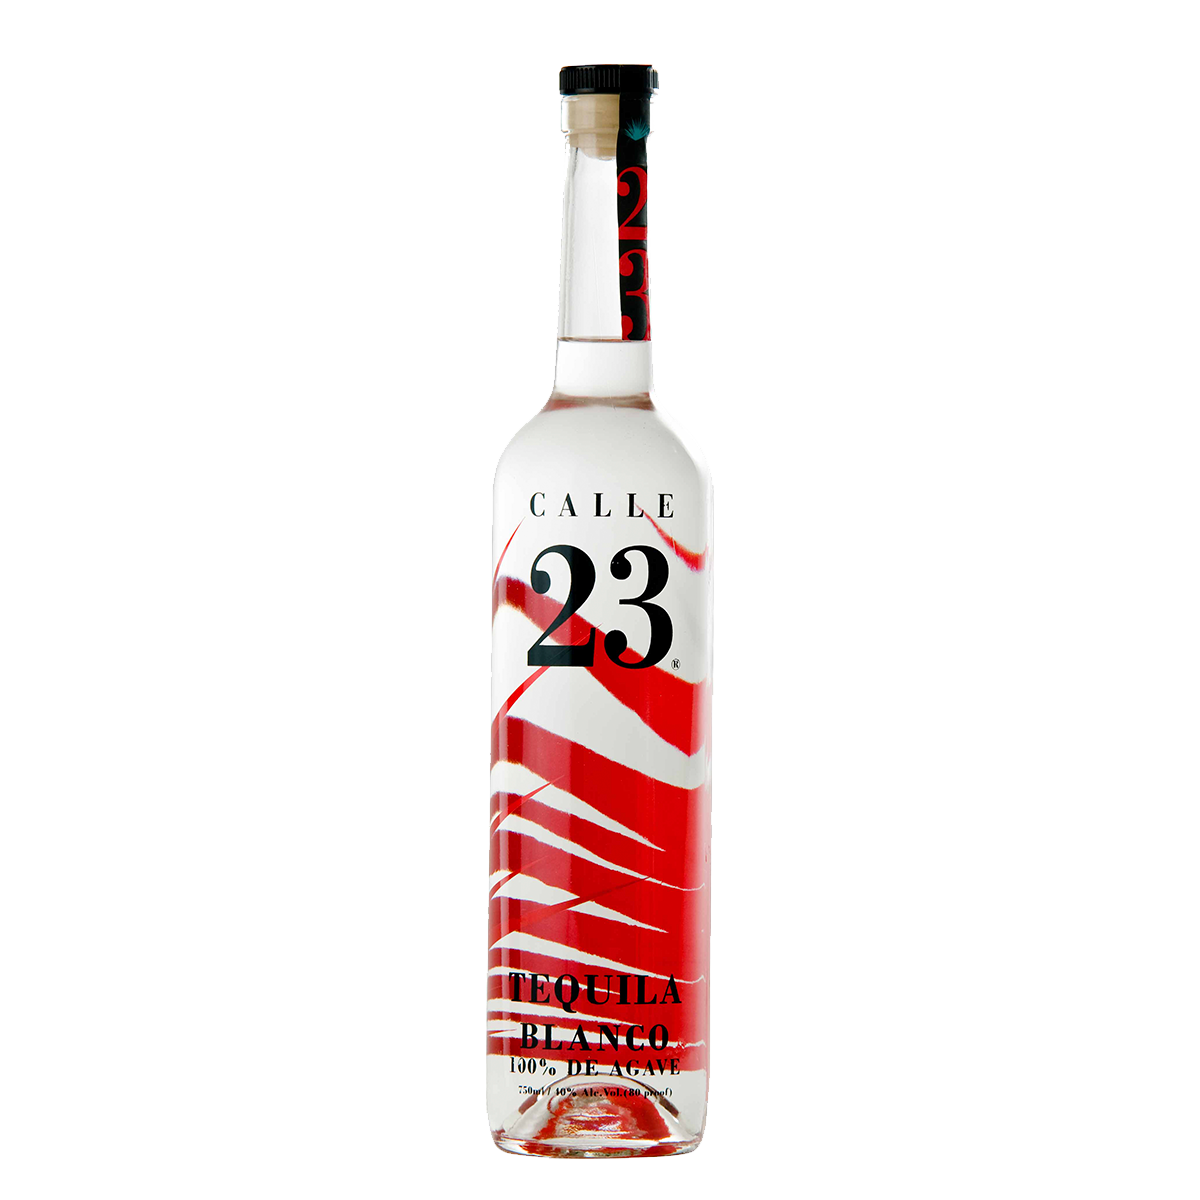 Calle 23 Blanco Tequila 100% Agave 700ml